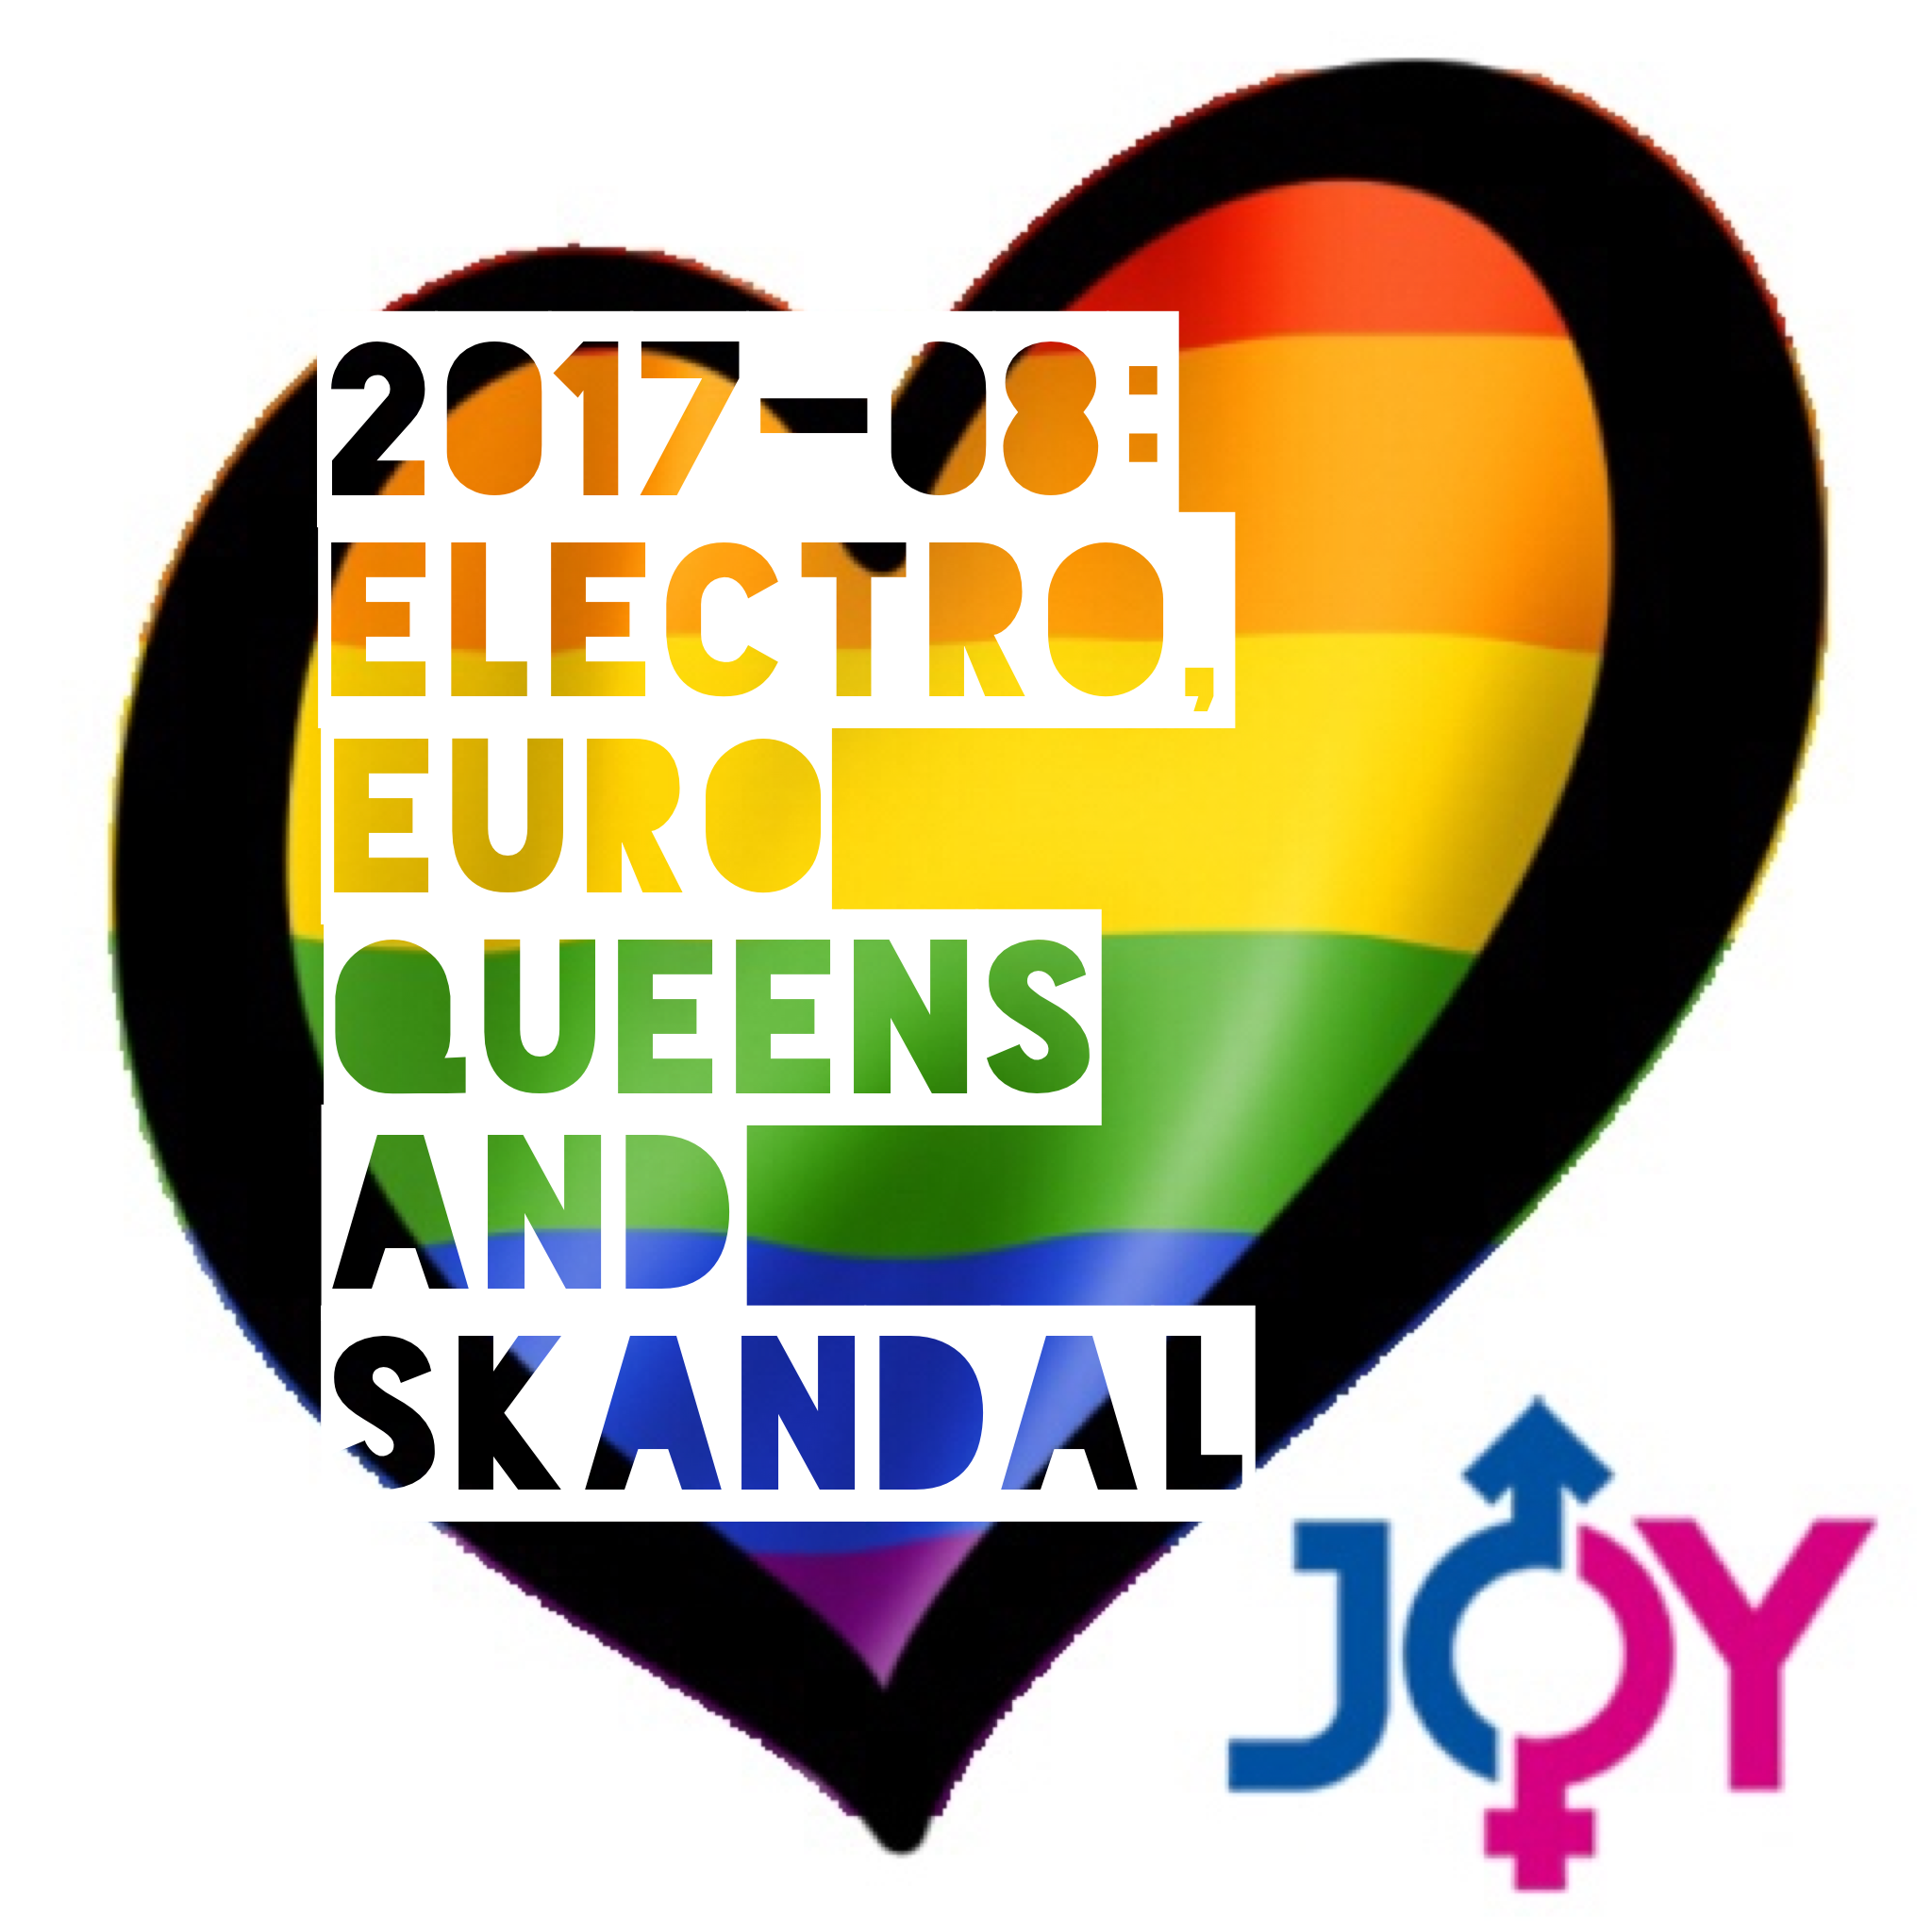 2017-08: Electro, Euro queens and skandal